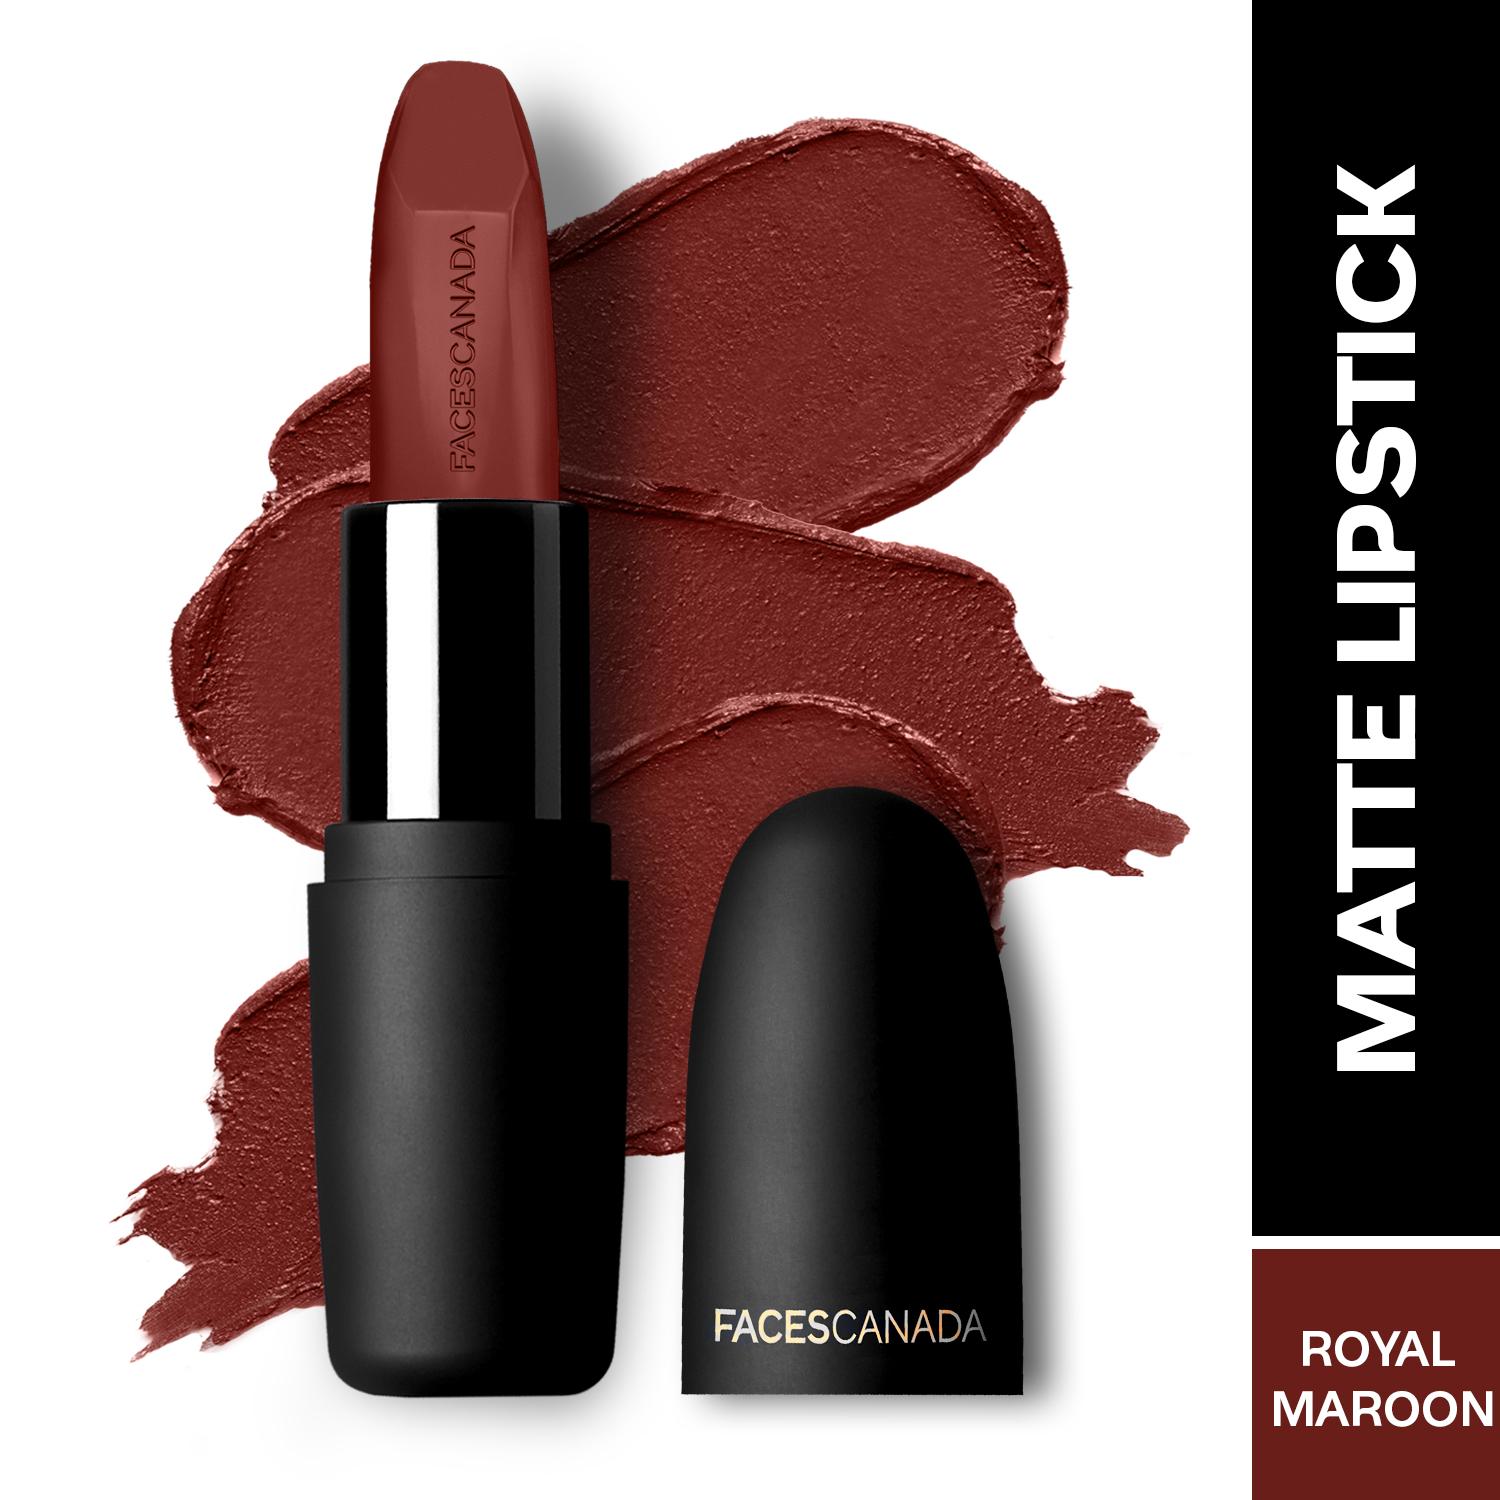 Faces Canada Weightless Matte Lipstick, Pigmented and Hydrated Lips - Royal Maroon 16 (4.5 g)